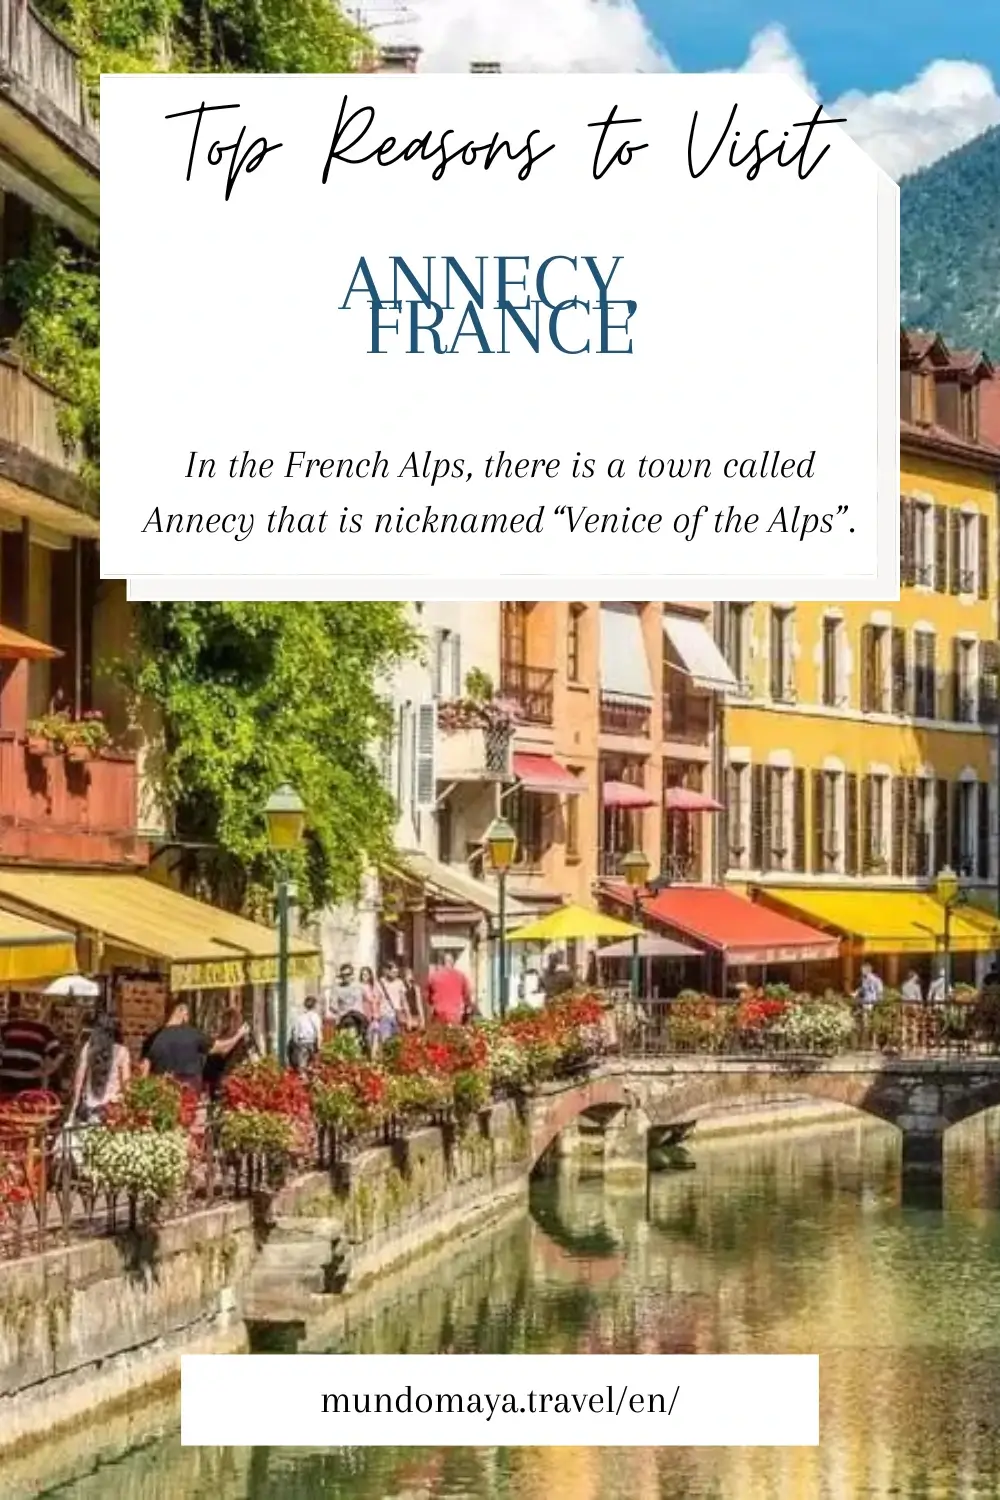 14 Top Reasons to Visit Annecy, France